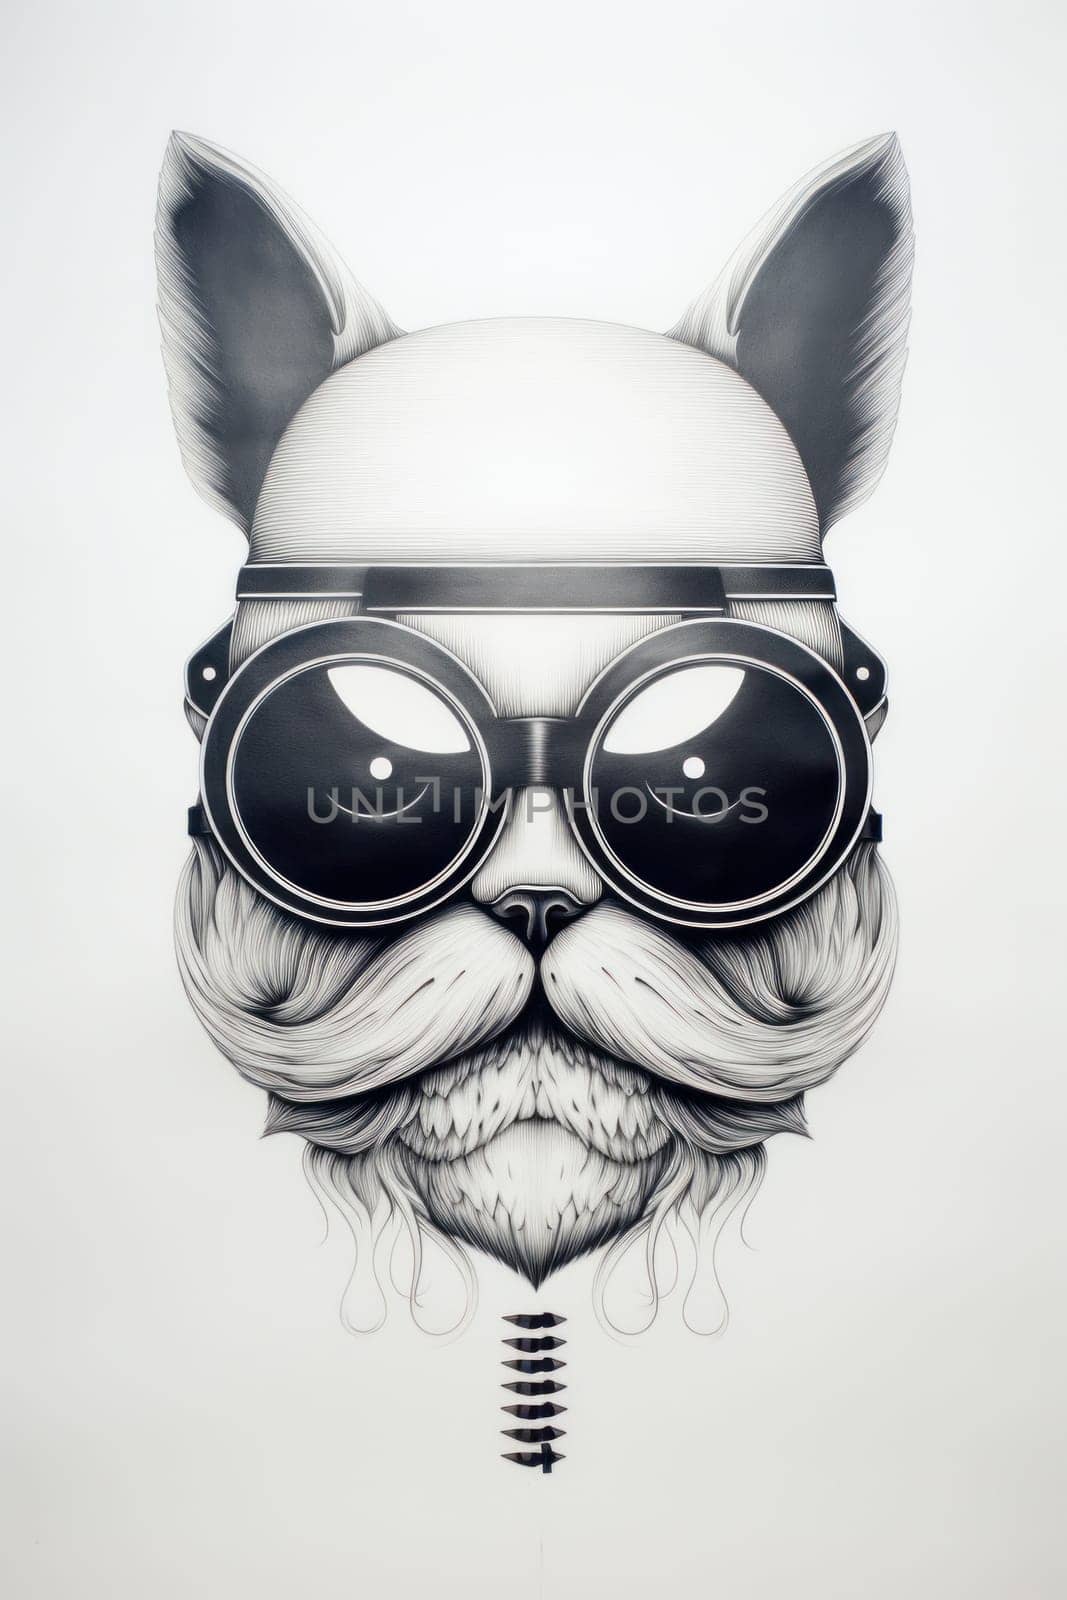 A black and white drawing of a cat wearing sunglasses